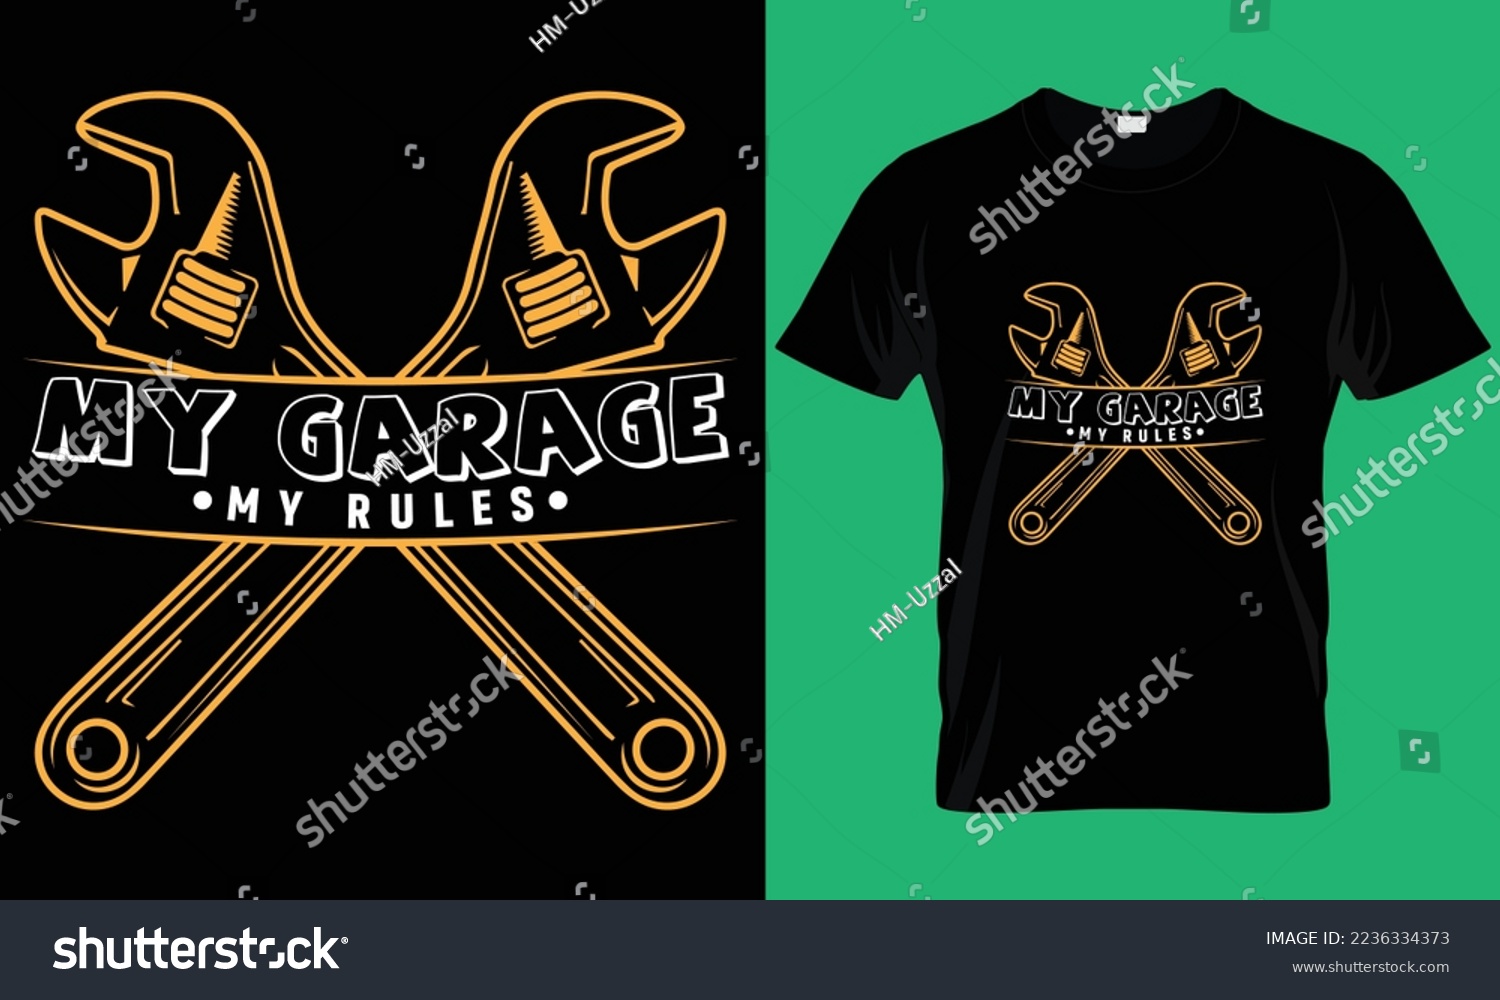 SVG of Mechanic T- Shirt Design Template (New And Creative ) svg